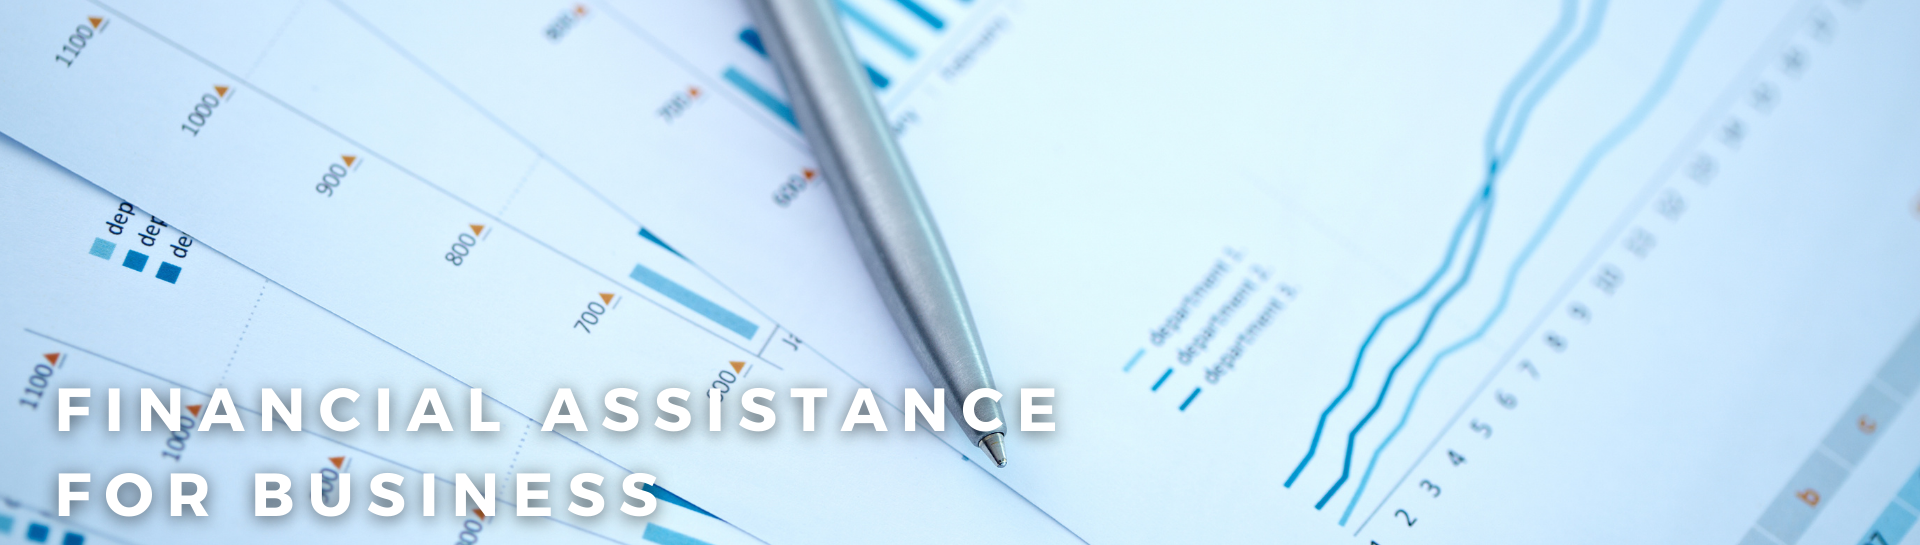 Financial Assistance for Business